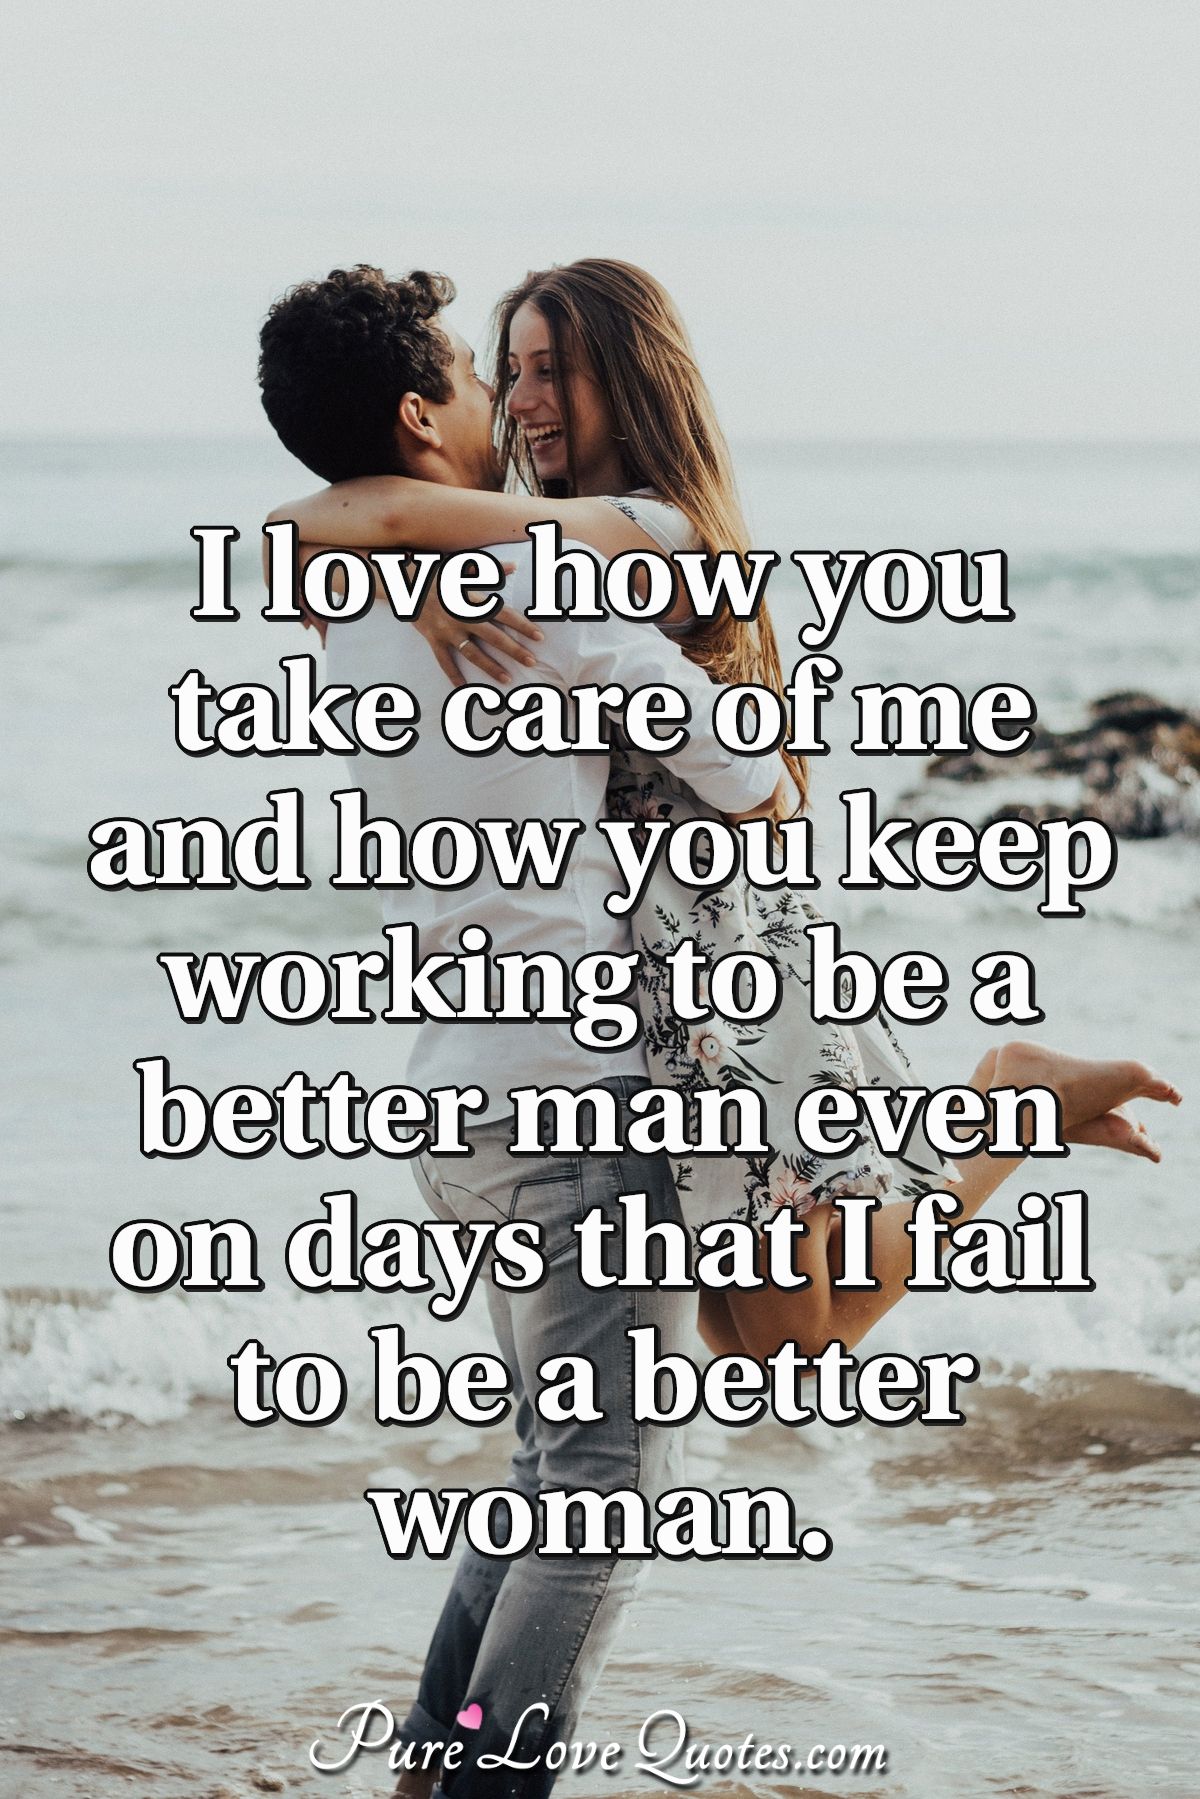 I love how you take care of me and how you keep working to be a better man even on days that I fail to be a better woman. - Anonymous